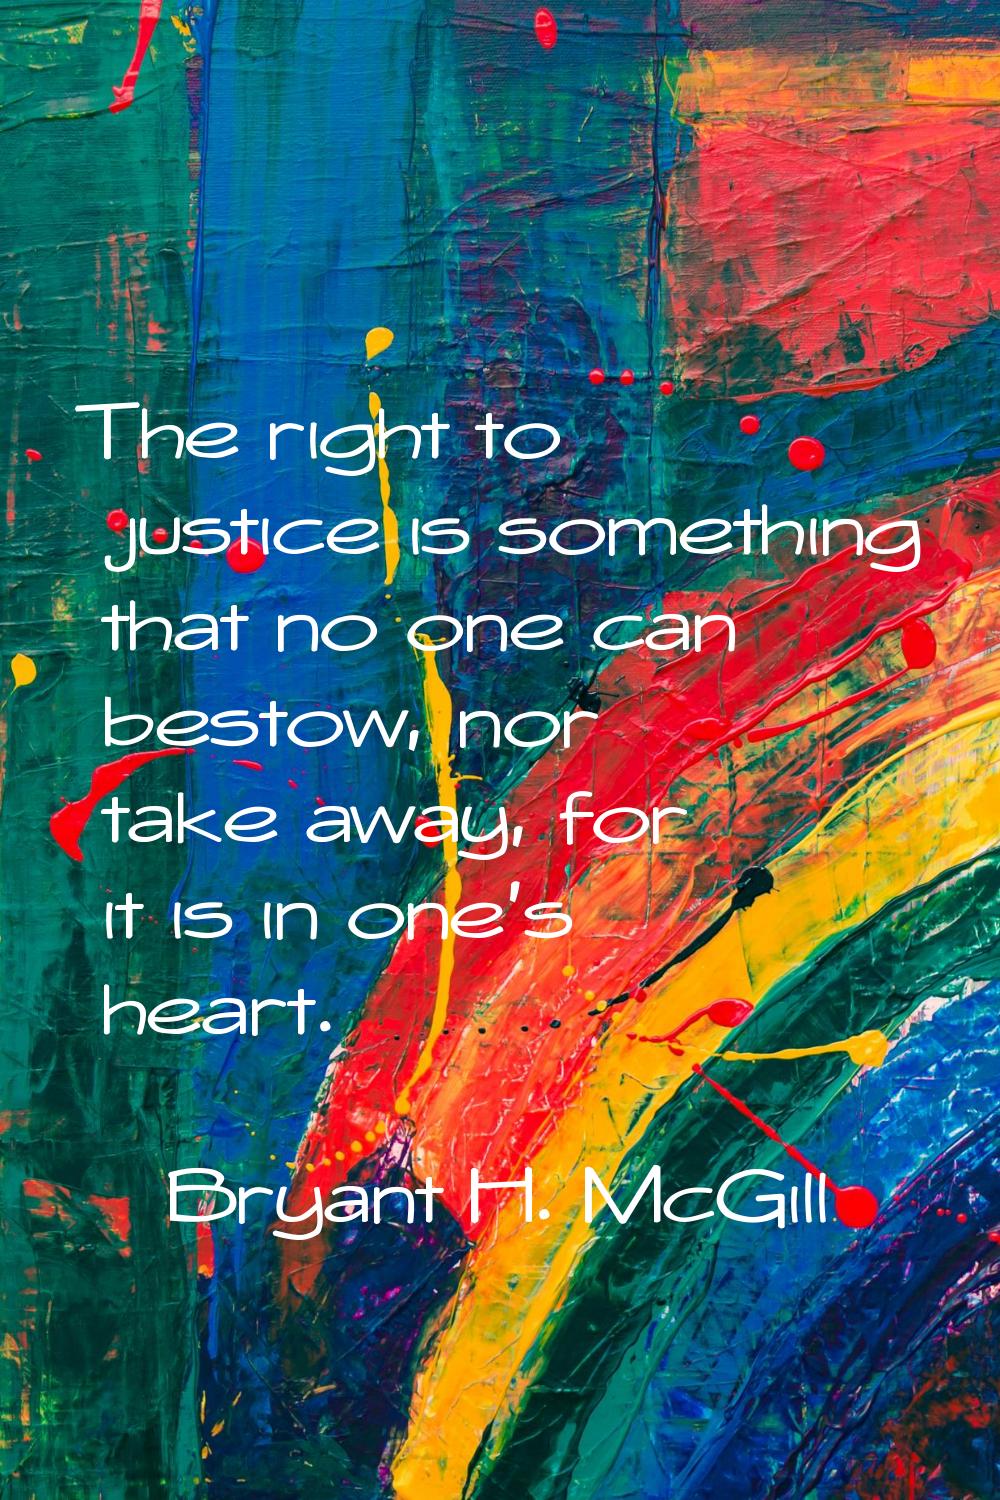 The right to justice is something that no one can bestow, nor take away, for it is in one's heart.